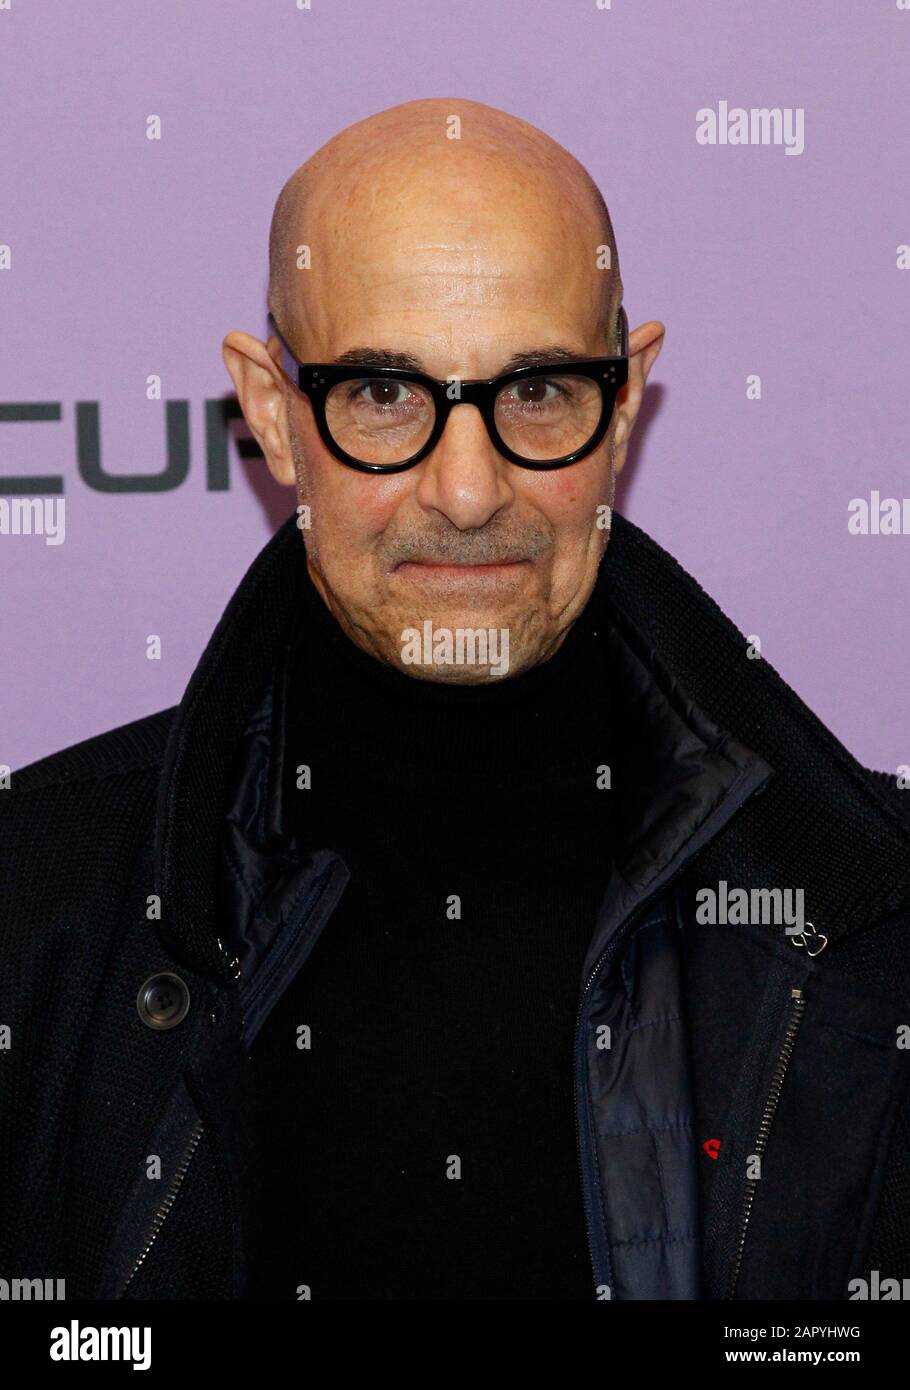 Park City, UT, USA. 24th Jan, 2020. Stanley Tucci at arrivals for WORTH Premiere at Sundance Film Festival 2020, Eccles Theater Center, Park City, UT January 24, 2020. Credit: JA/Everett Collection/Alamy Live News Stock Photo